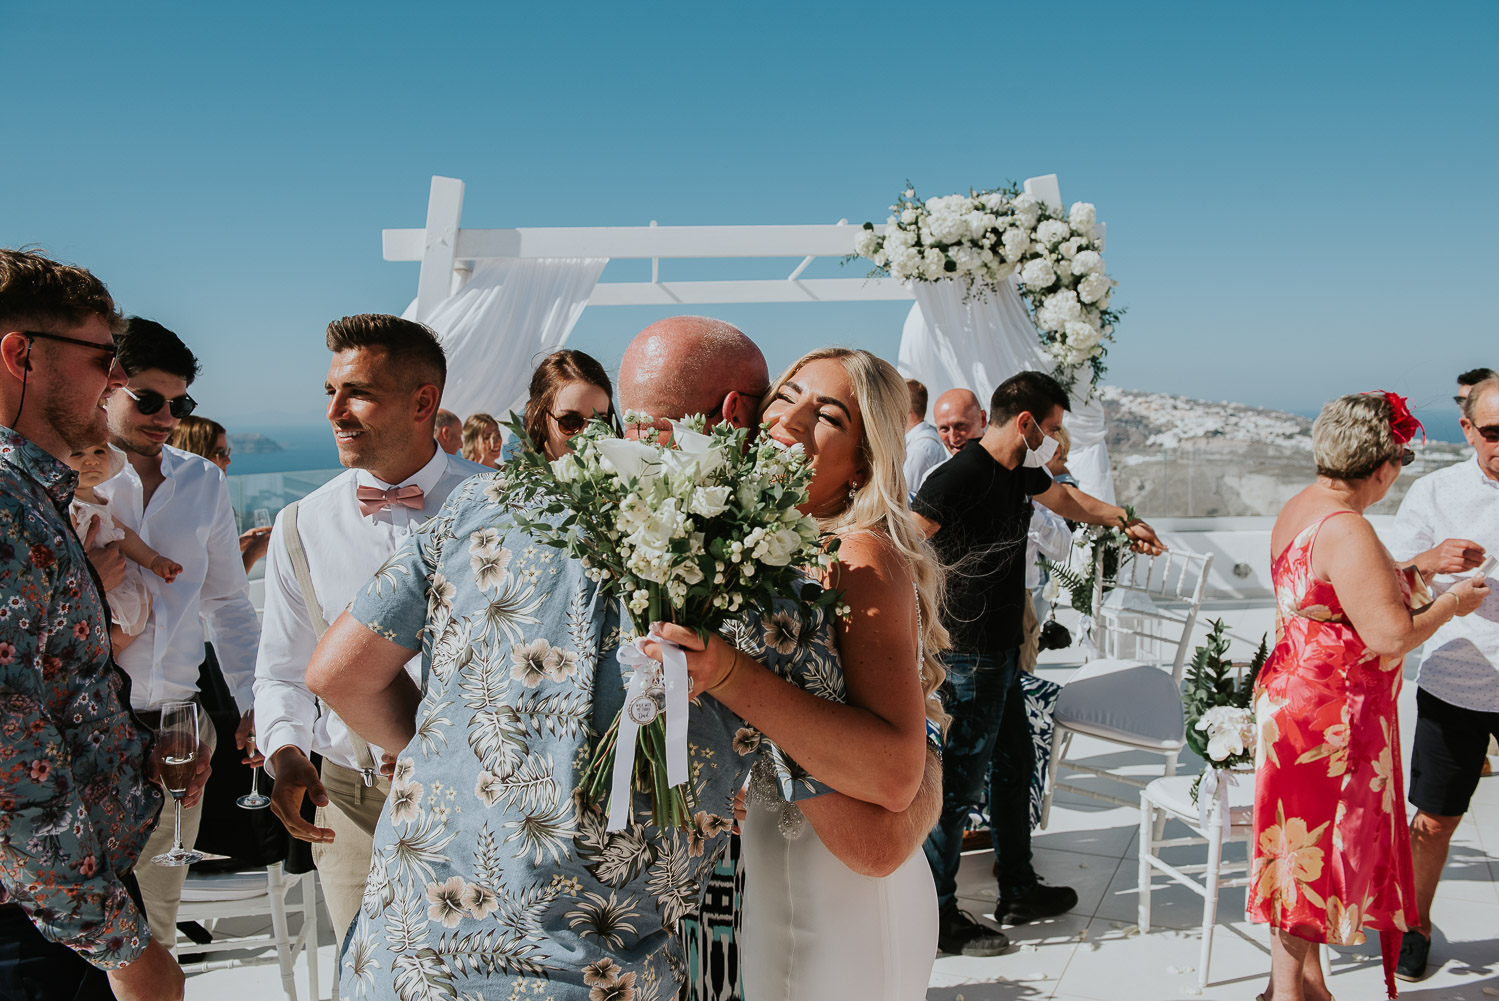 Wedding photographer Santorini: bride smiling hugging one of the guests with groom next to her  by Ben and Vesna.